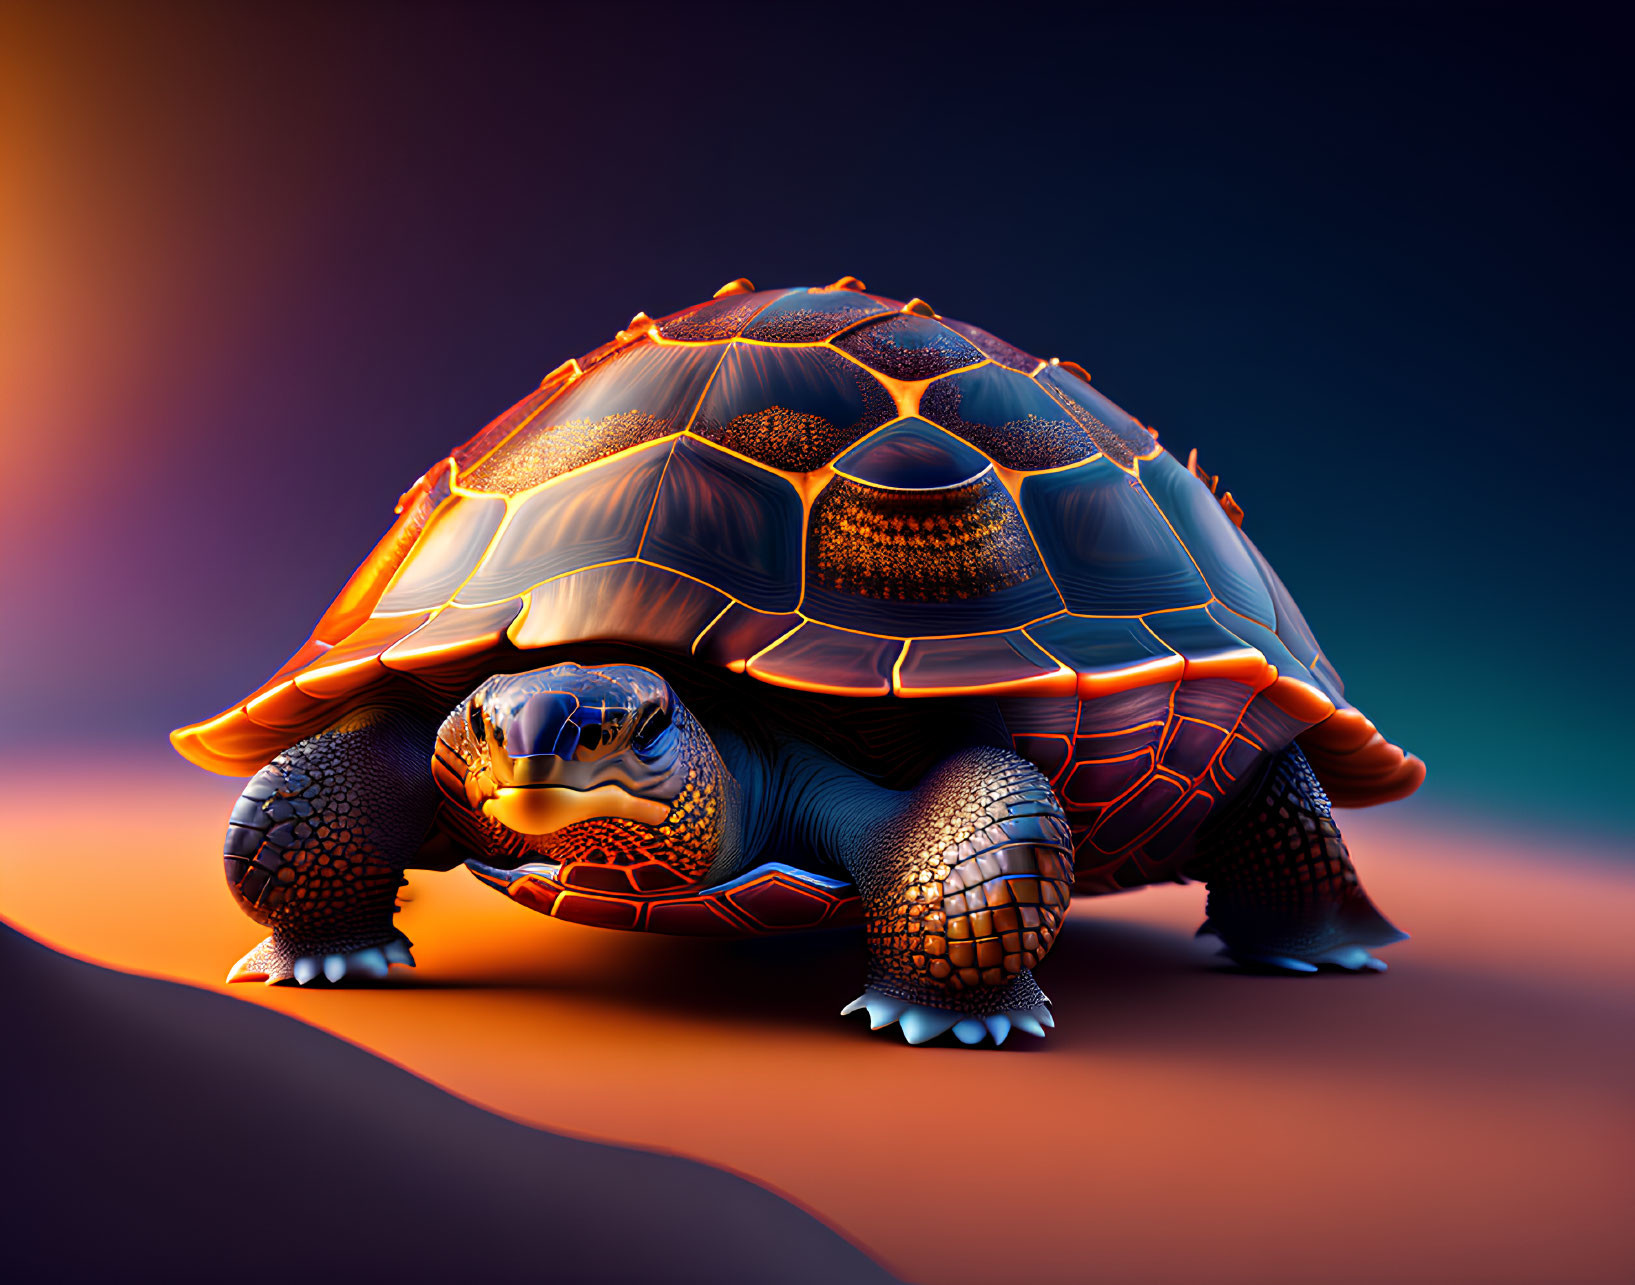 Digitally Rendered Tortoise with Geometric Patterned Shell in Orange and Blue on Gradient Background